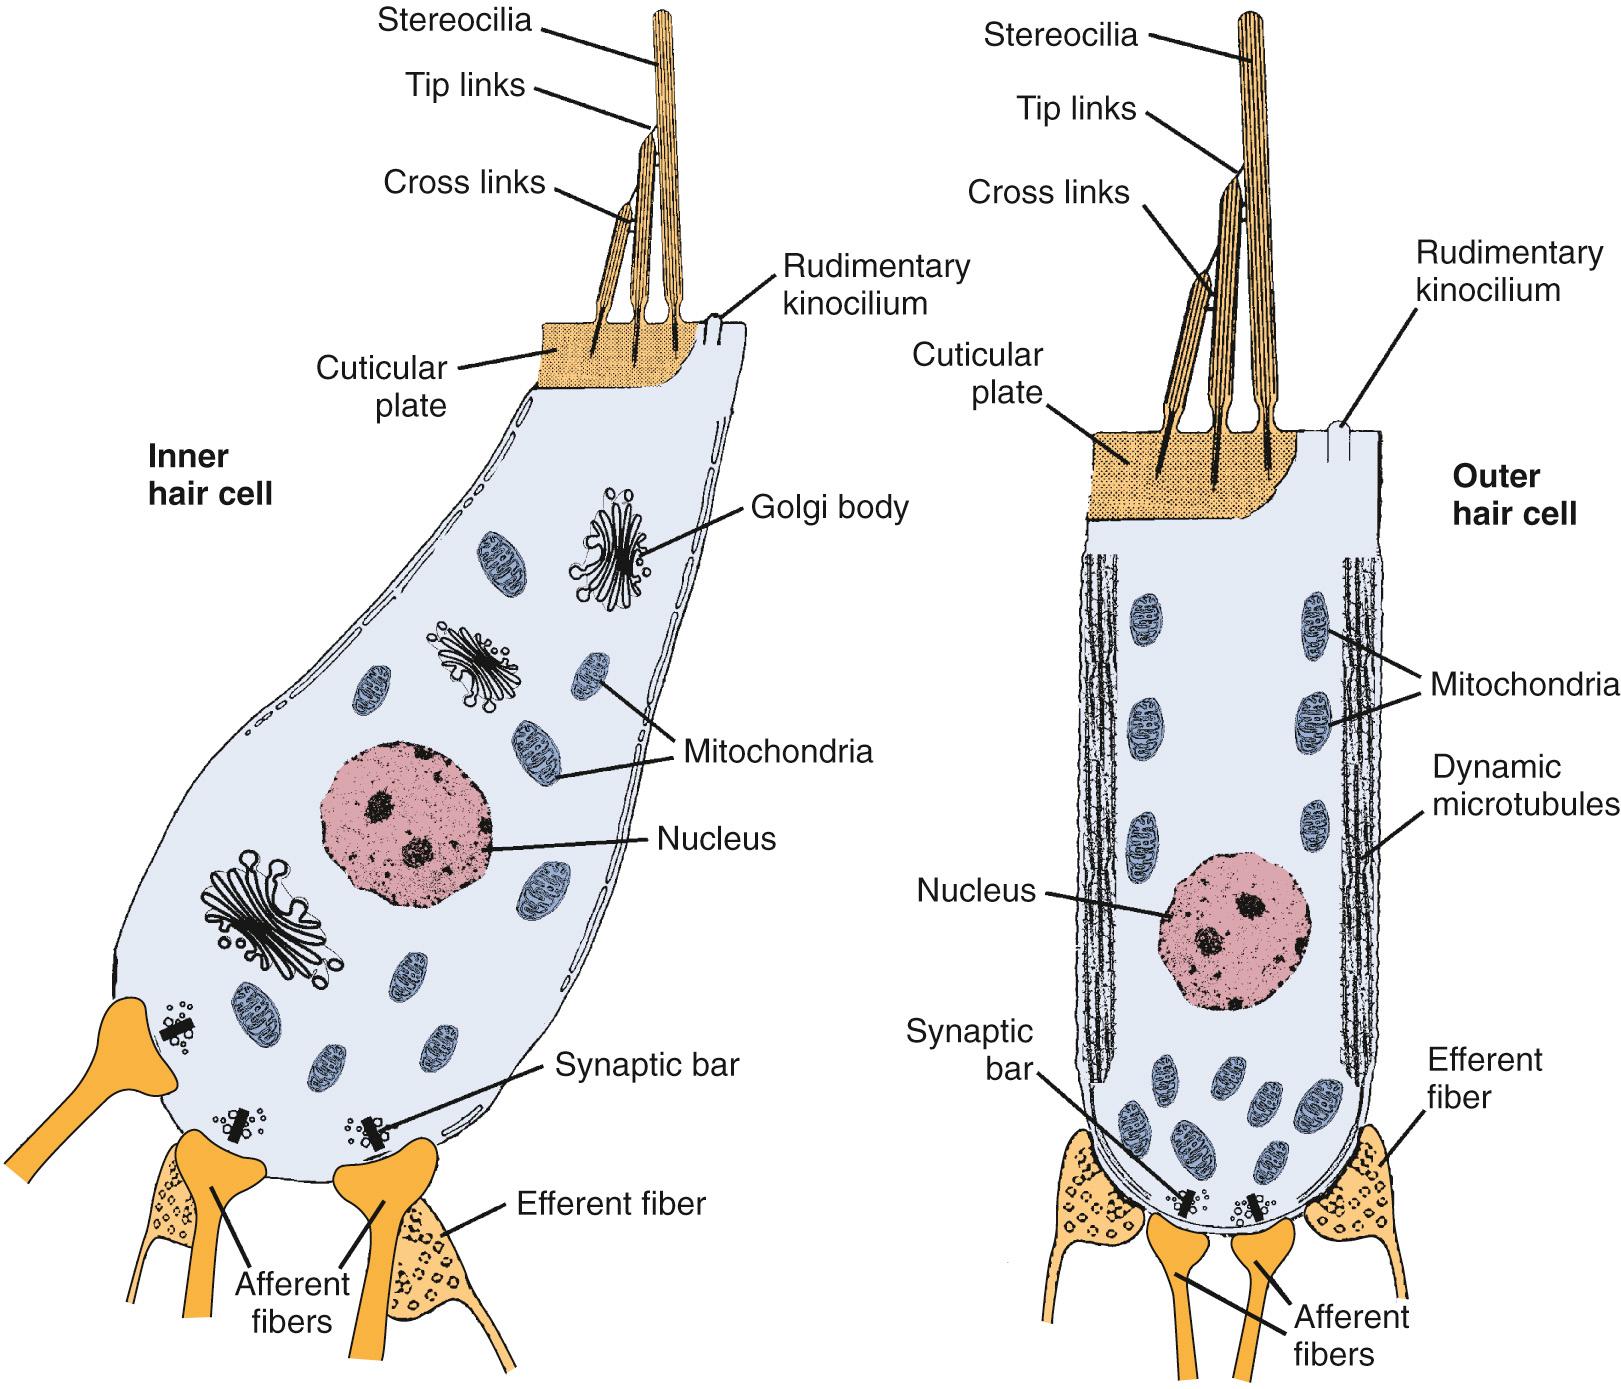 Fig. 127.3, Schematic depictions of inner (left) and outer (right) hair cells. Inner hair cells are flask shaped, receive extensive afferent innervation, and receive indirect efferent innervation. Outer hair cells are cylindrical and receive direct afferent and efferent innervation.